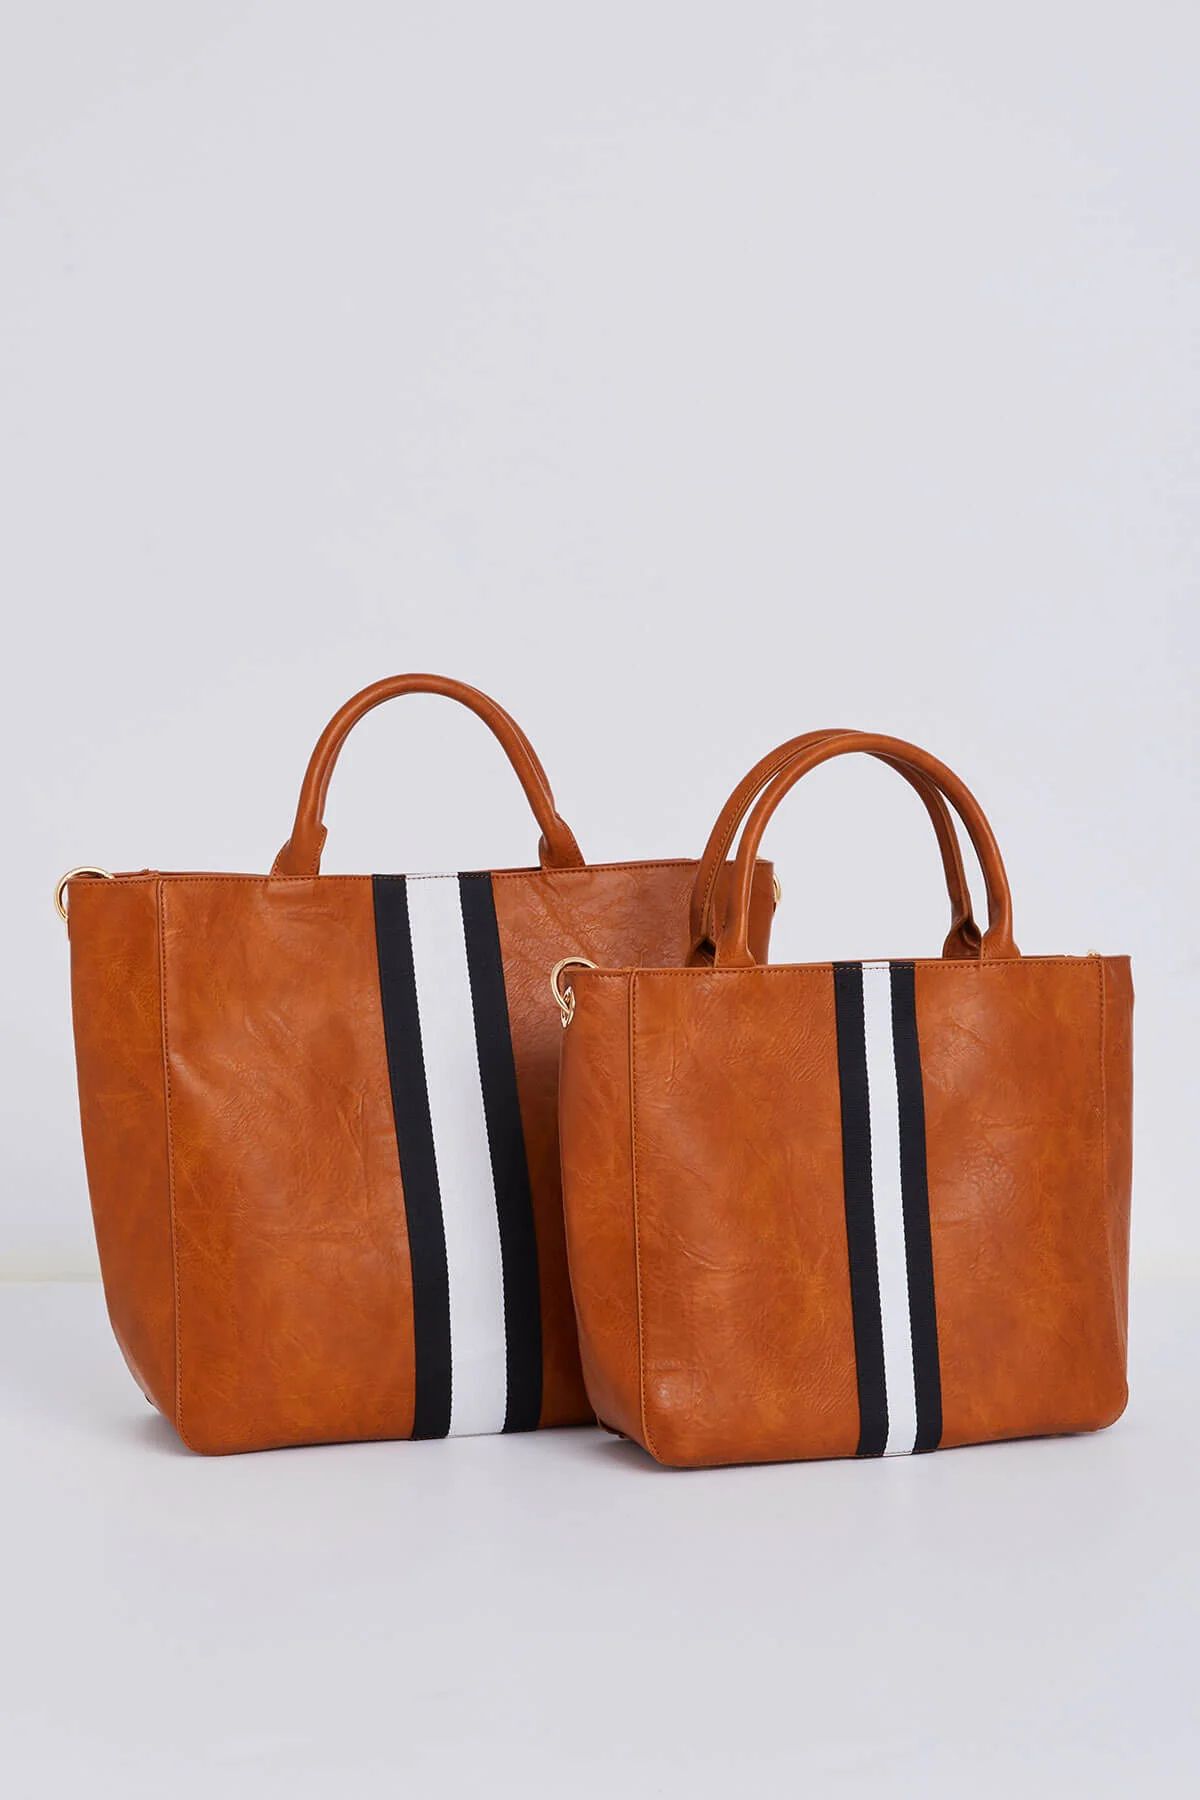 Social Threads x The Motherchic Striped Totes | Social Threads